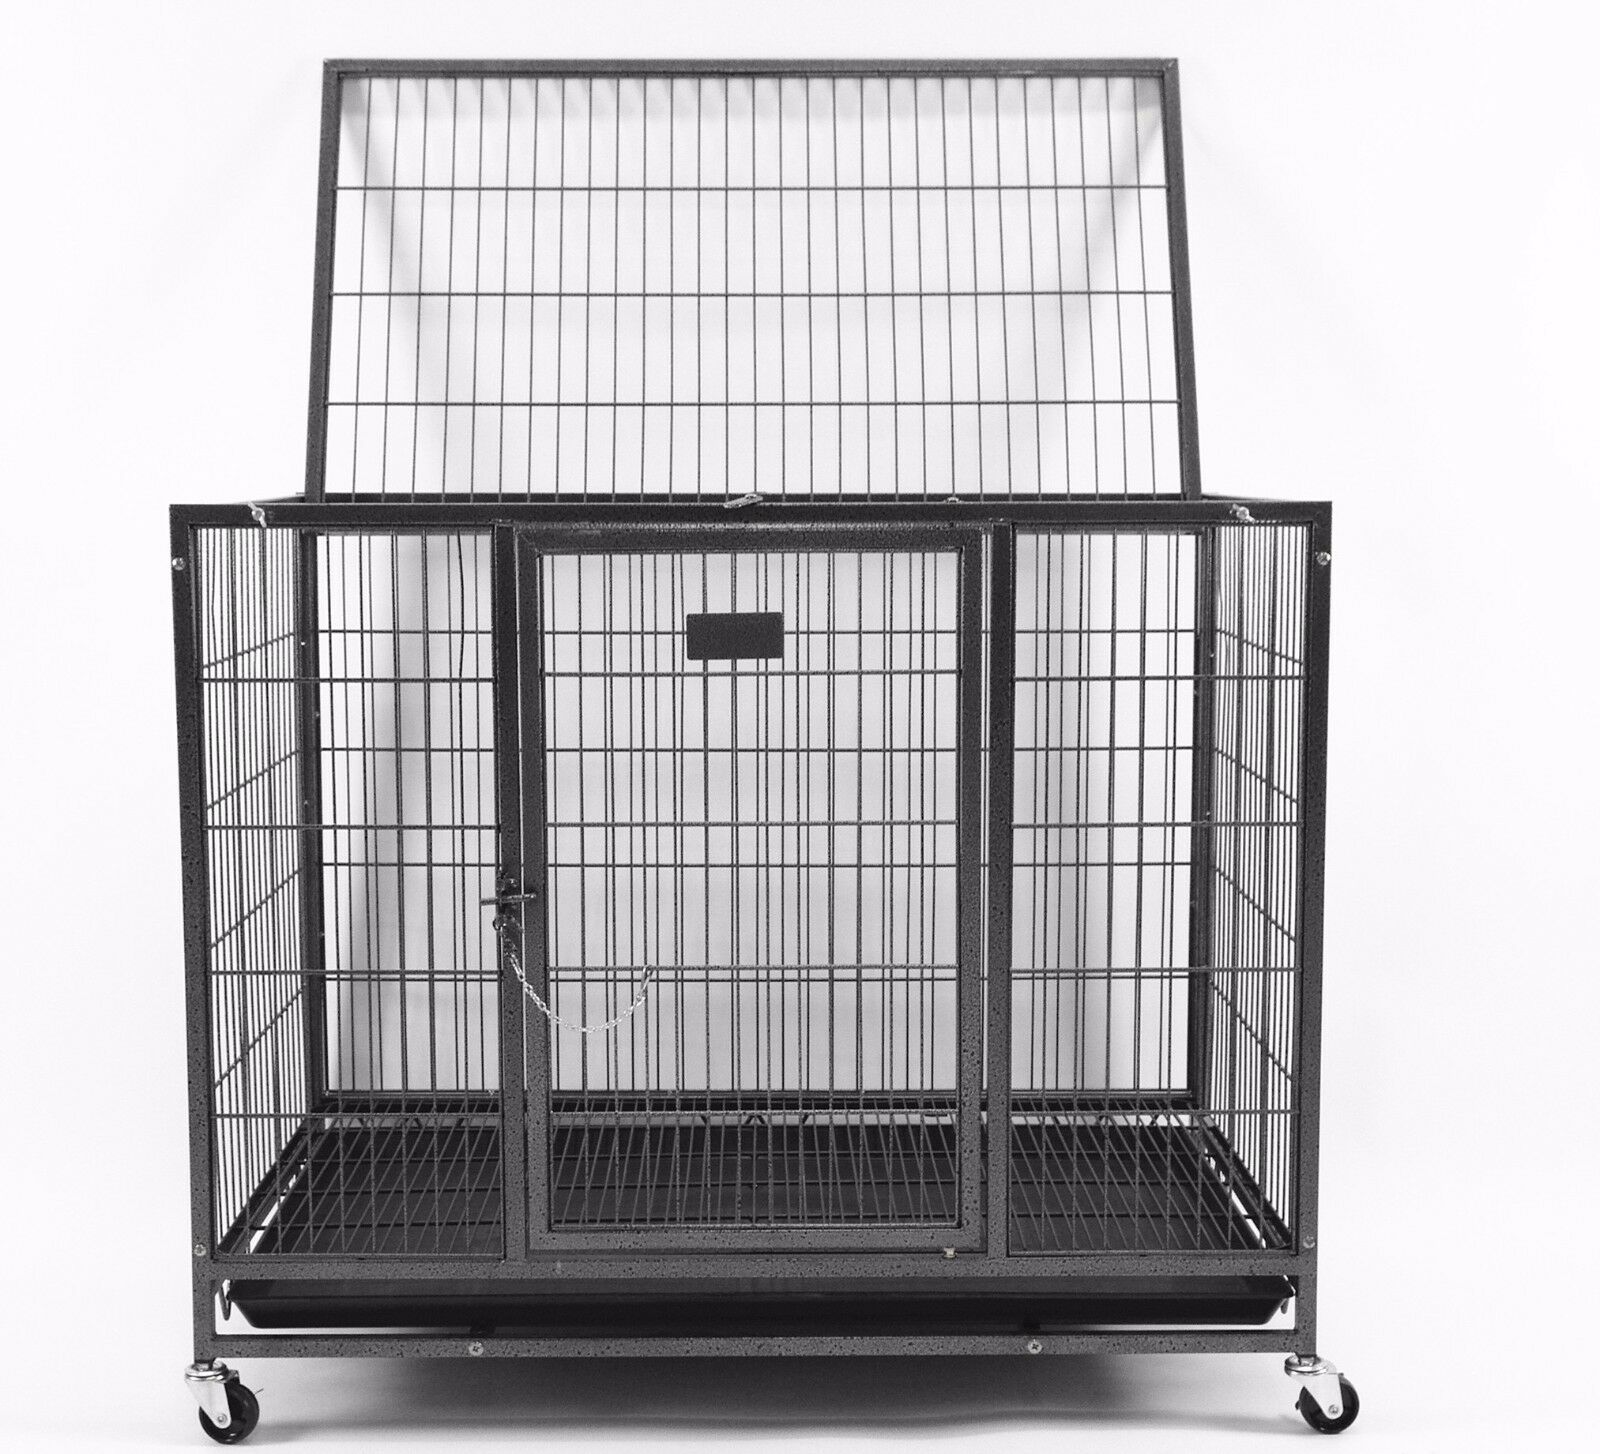 New Homey Pet 37" Heavy Duty Metal Dog Pet Crate Cage Kennel W/ Castor & Tray